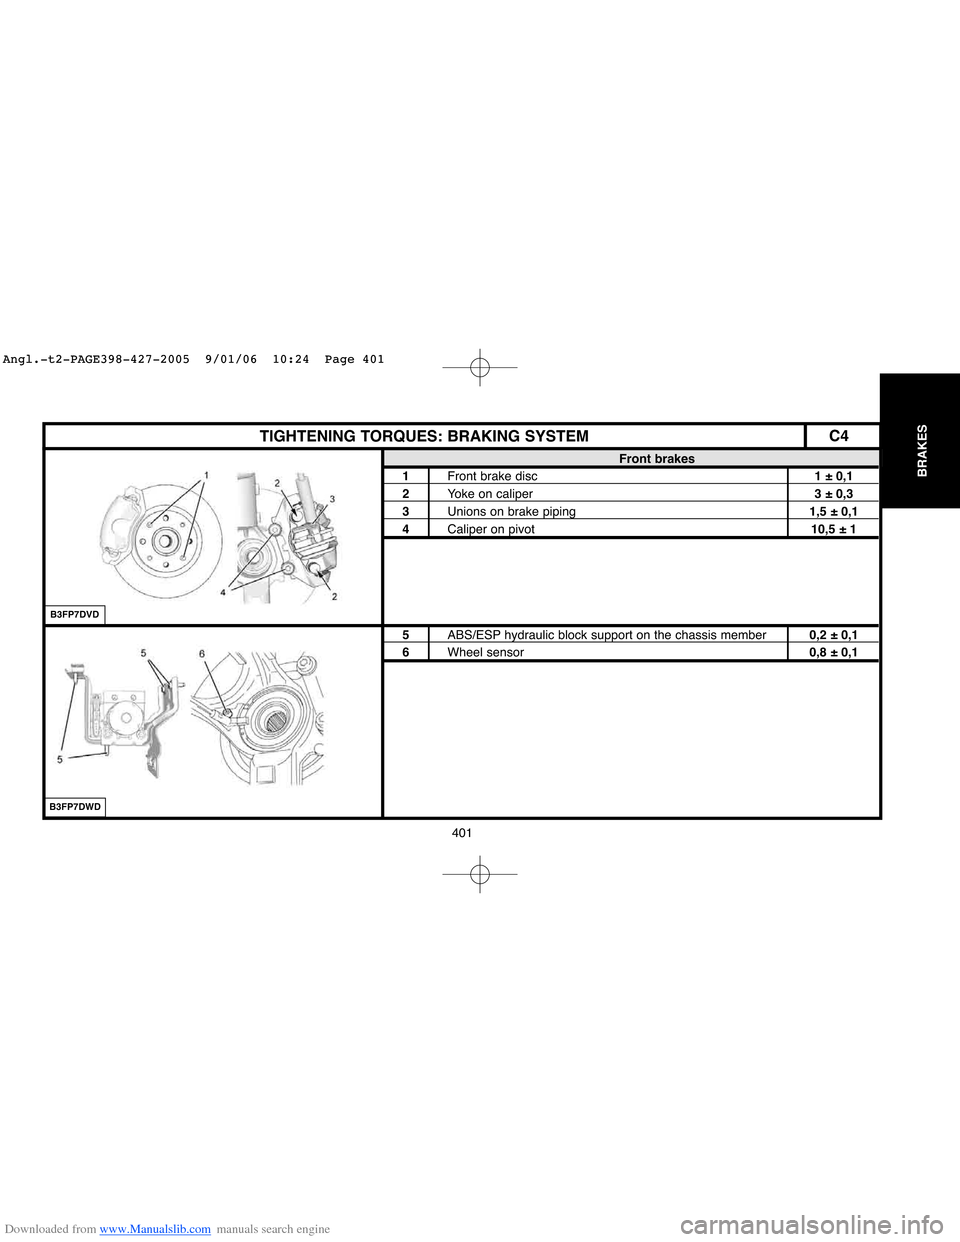 Citroen C4 2005 2.G Workshop Manual Downloaded from www.Manualslib.com manuals search engine 401
BRAKES
TIGHTENING TORQUES: BRAKING SYSTEM
Front brakes
1Front brake disc1 ± 0,1
2Yoke on caliper3 ± 0,3
3Unions on brake piping1,5 ± 0,1